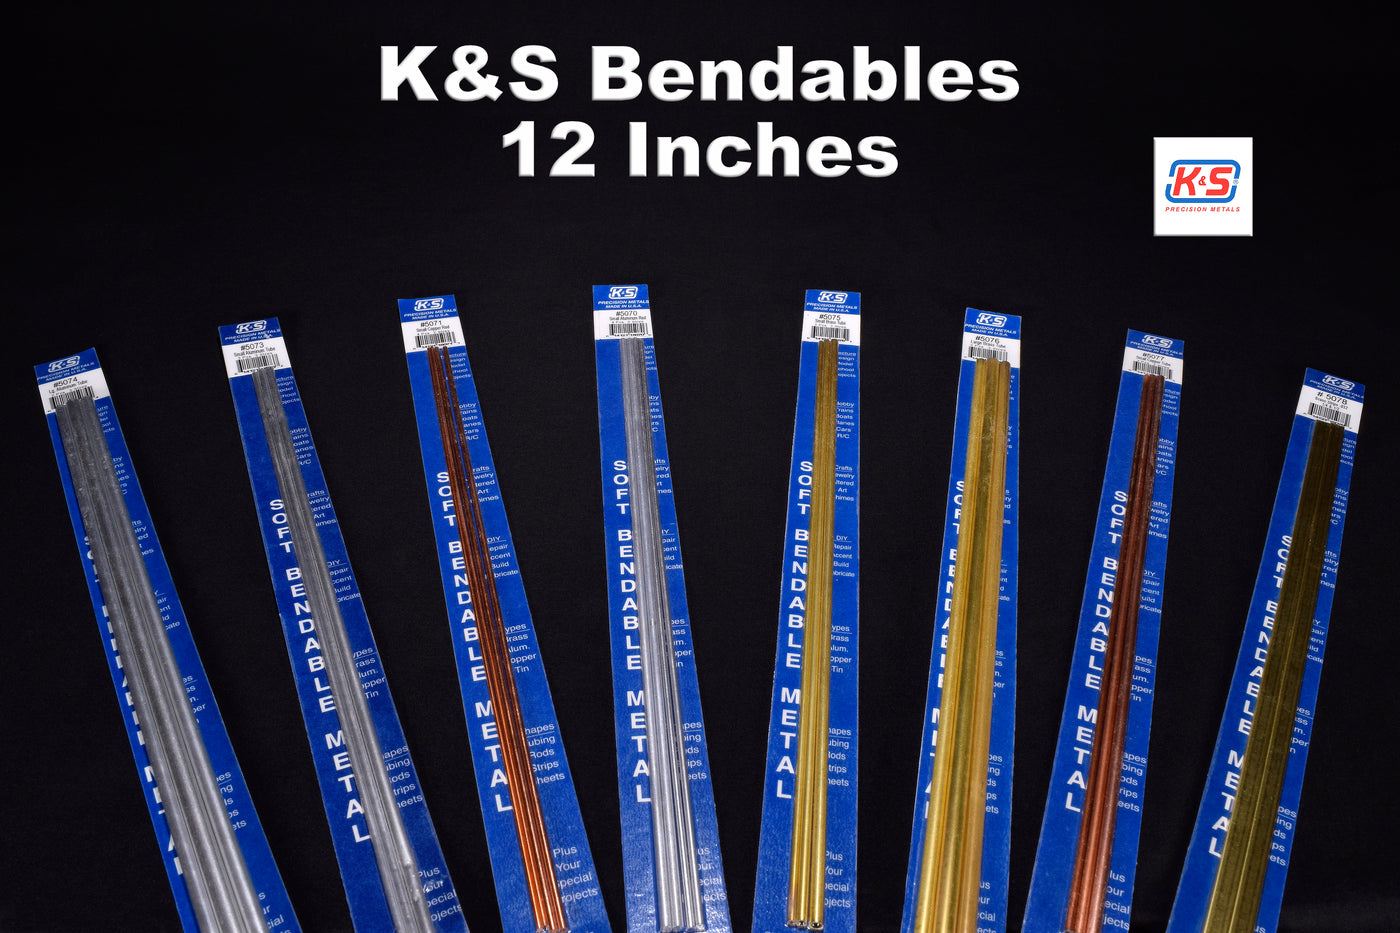 K&S Bendable Copper Tube 3/32, 5/32 and 1/8 1pc. Each